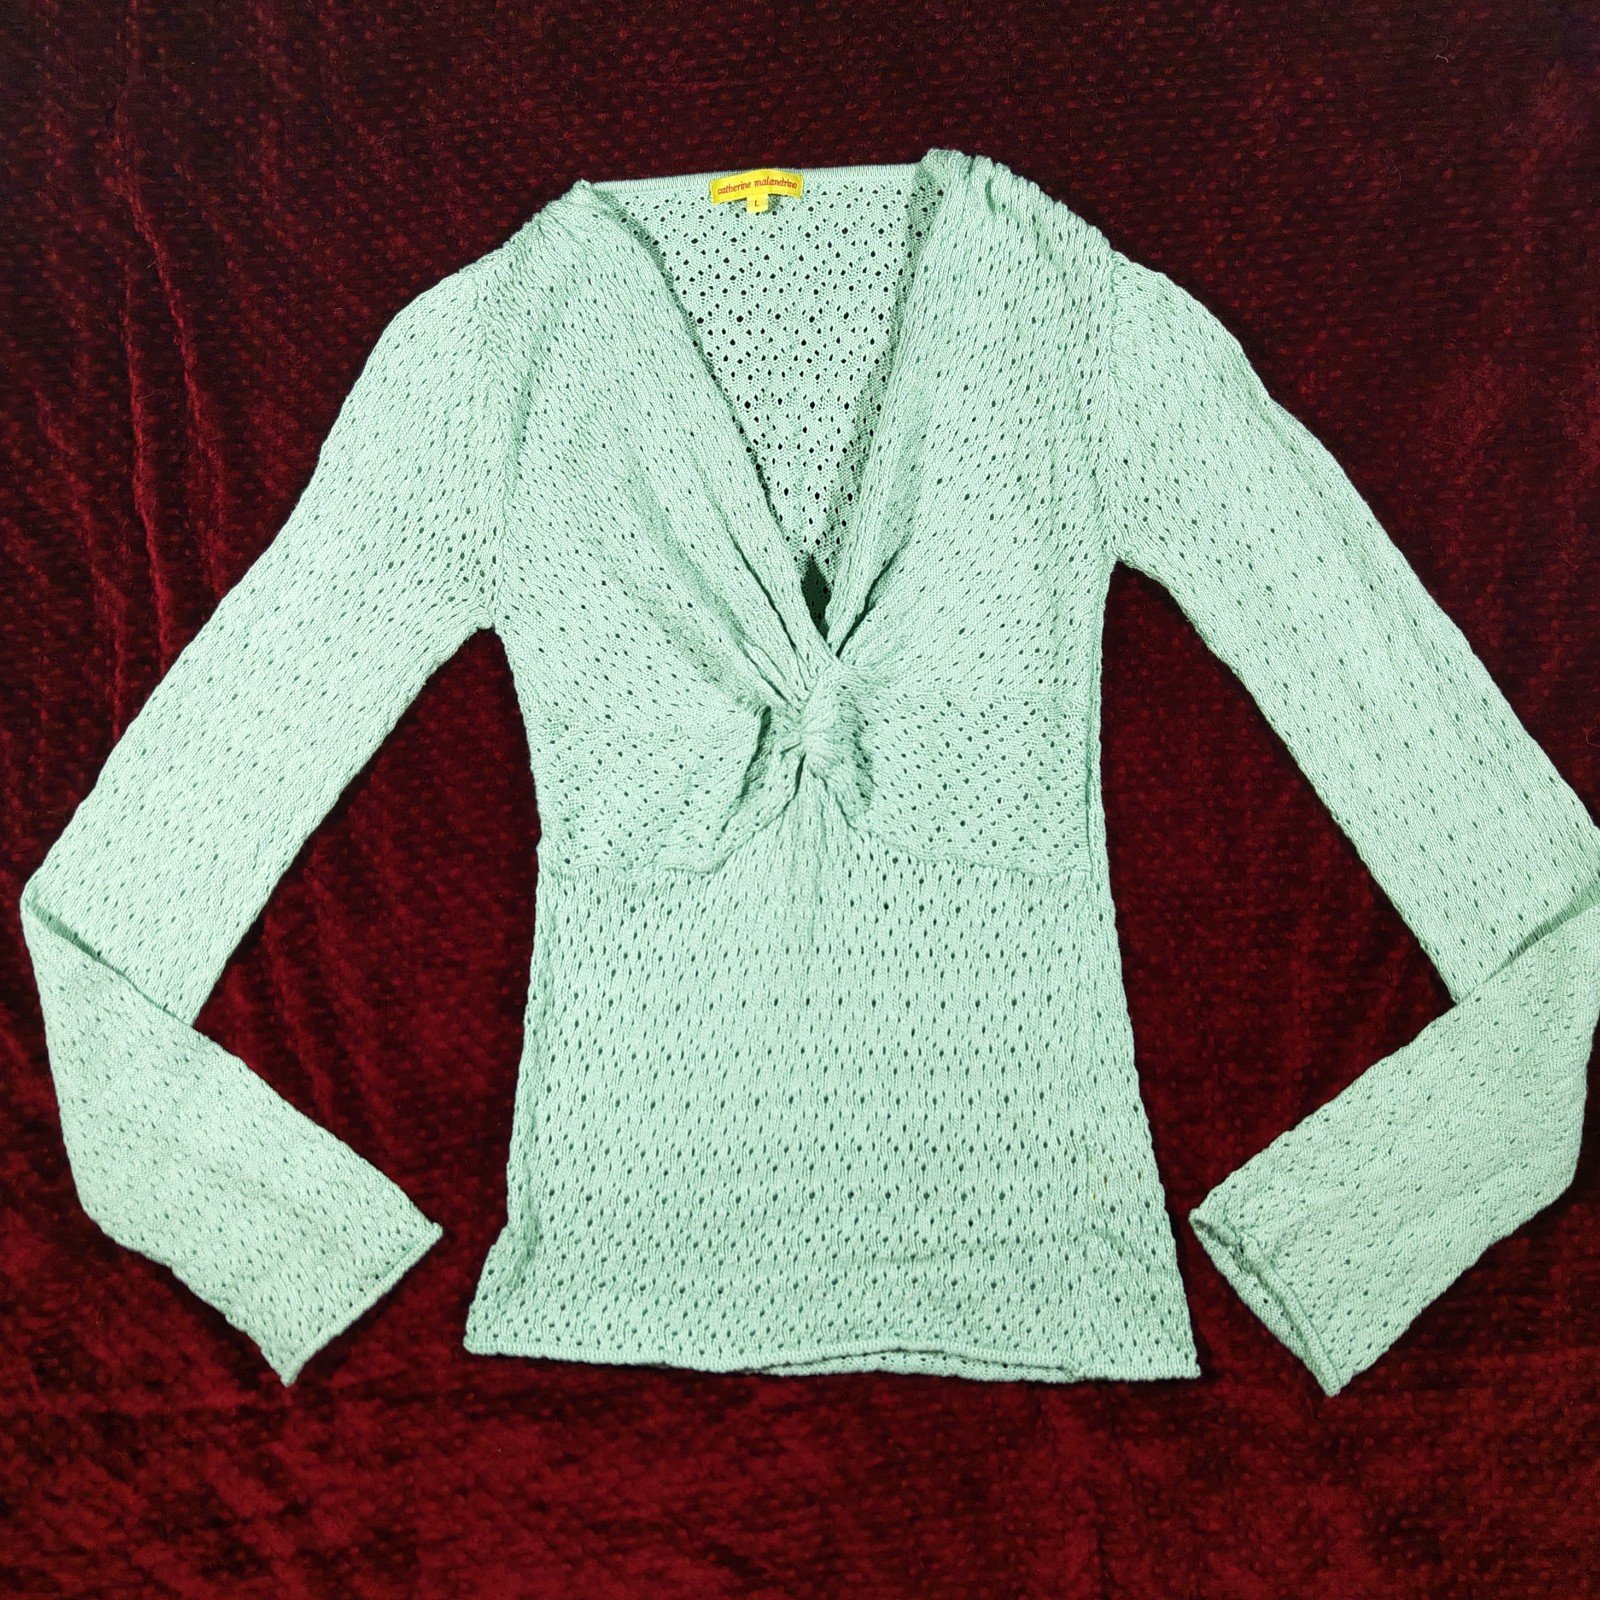 save up to 70% Catherine Maladrino Green Crochet Long Sleeve Wrap Top P3RiBcct3 New Style